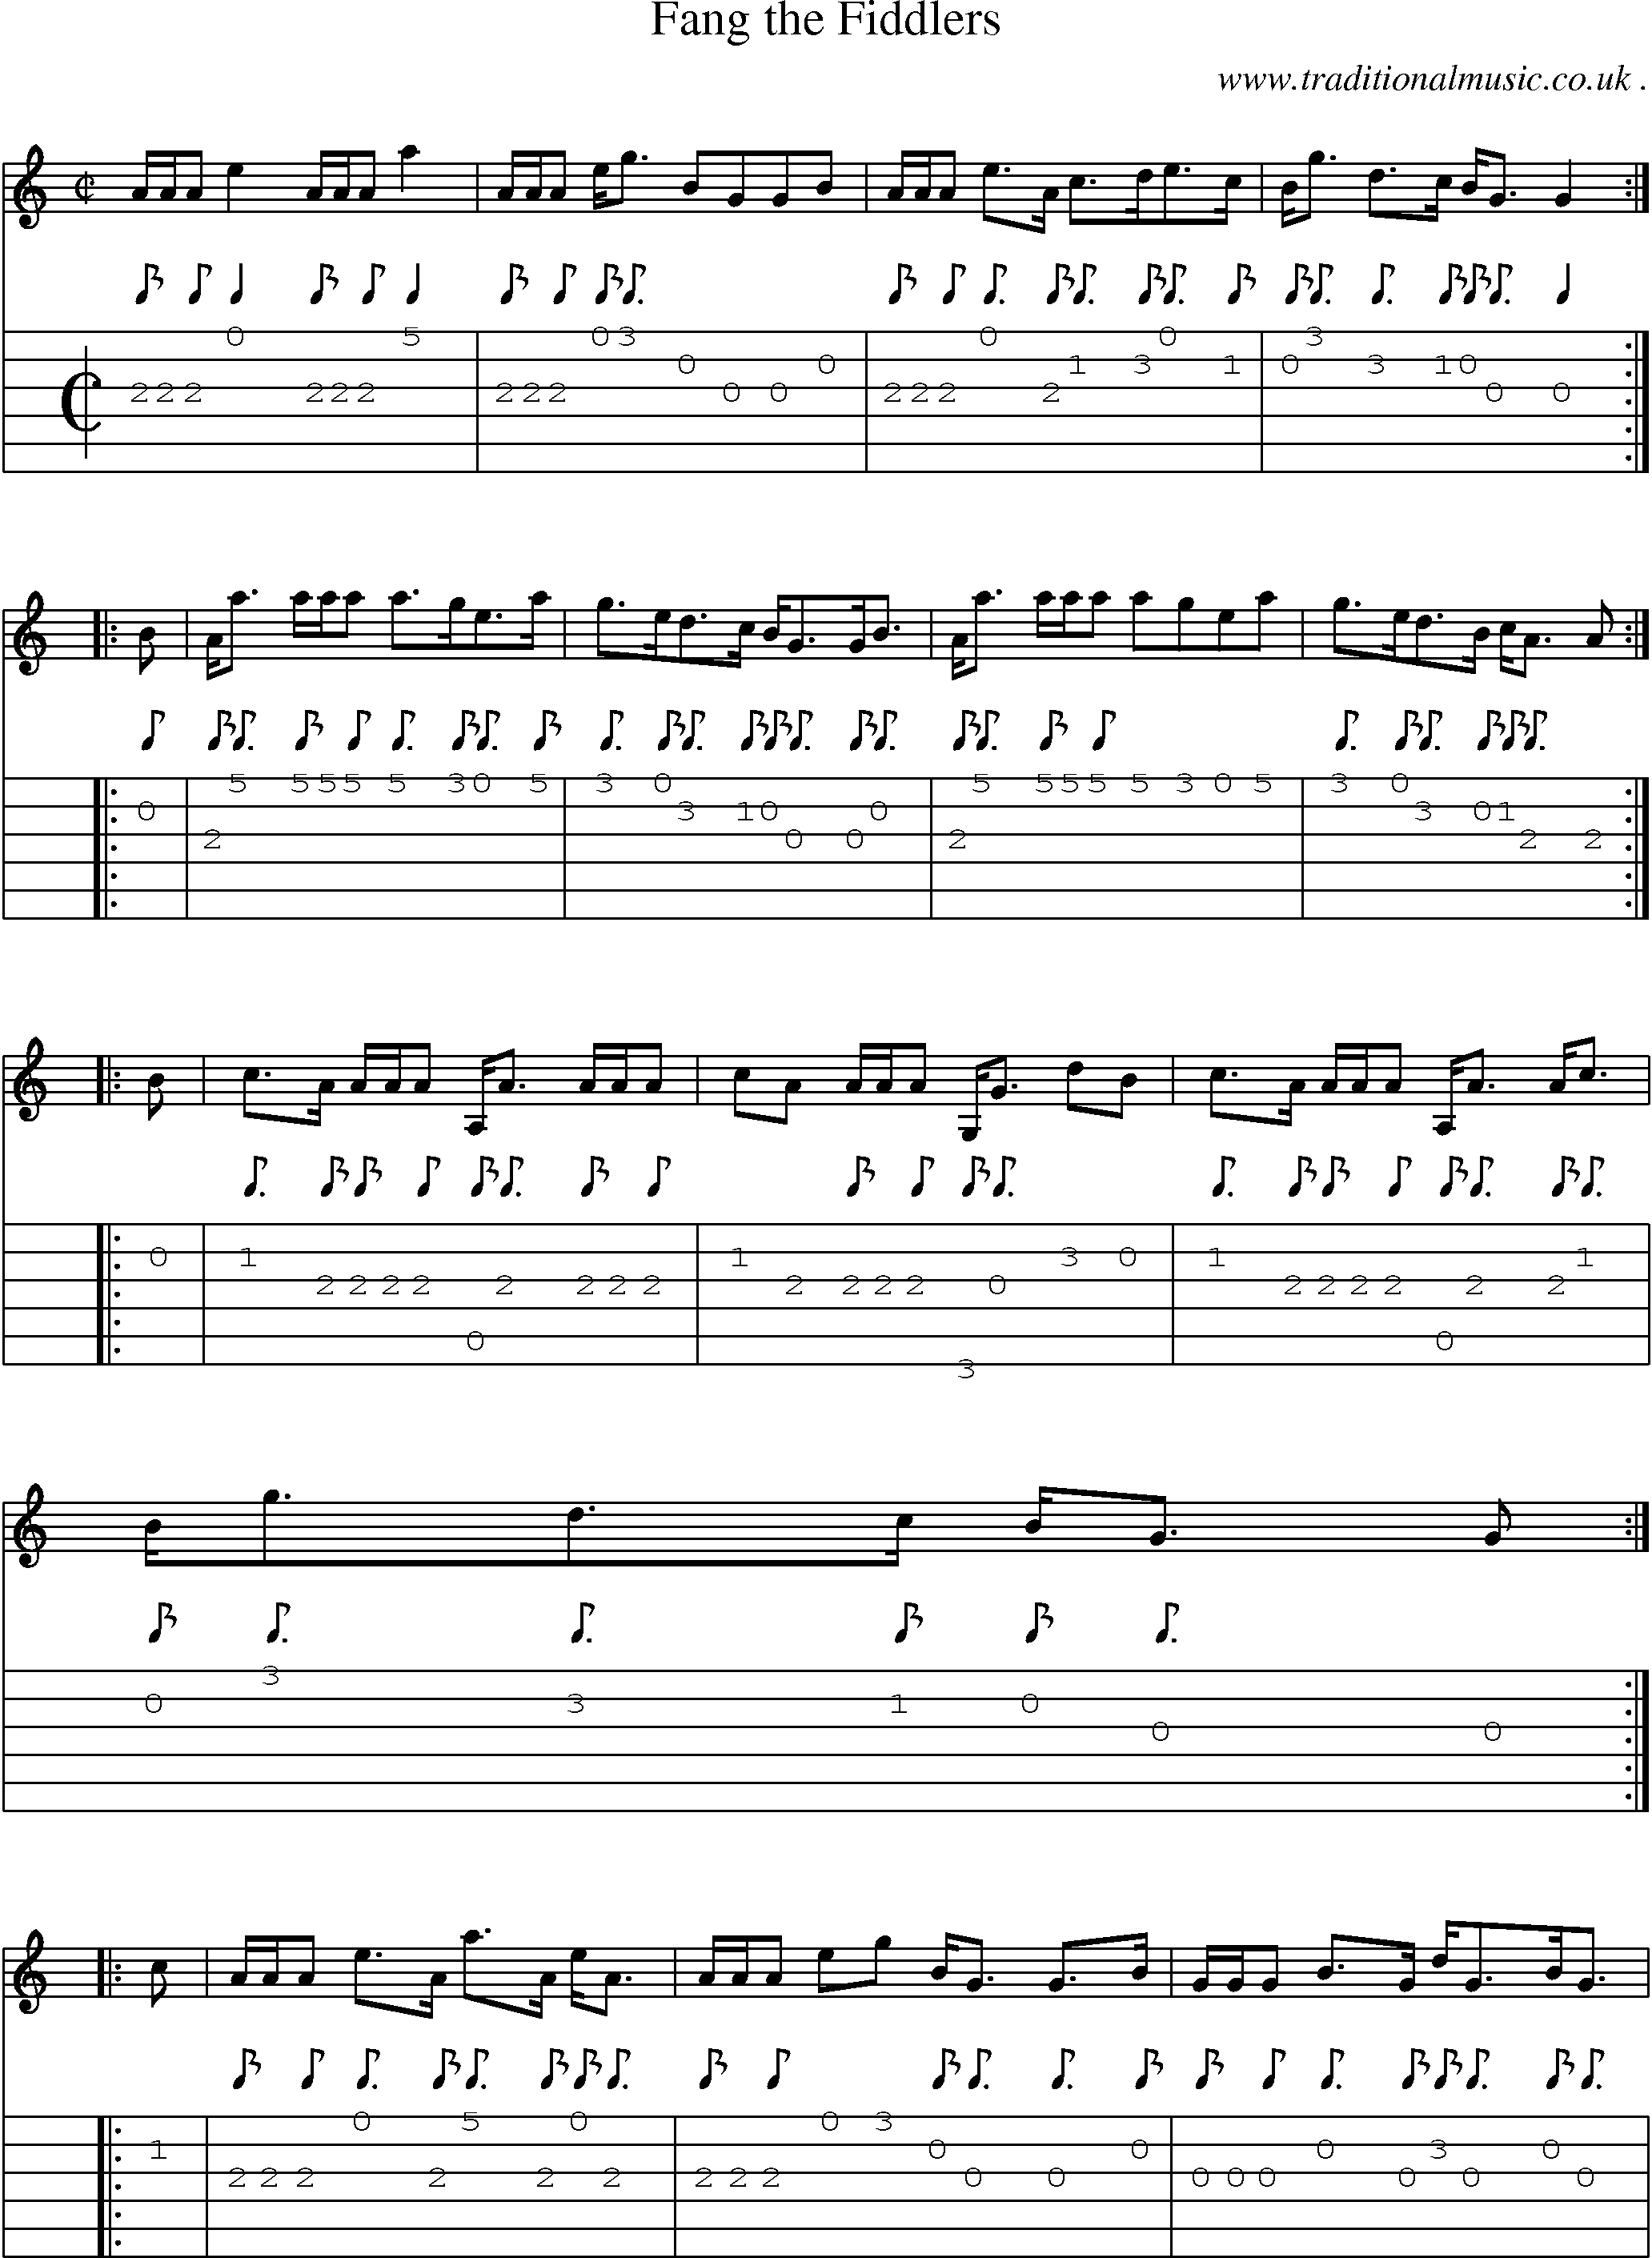 Sheet-music  score, Chords and Guitar Tabs for Fang The Fiddlers